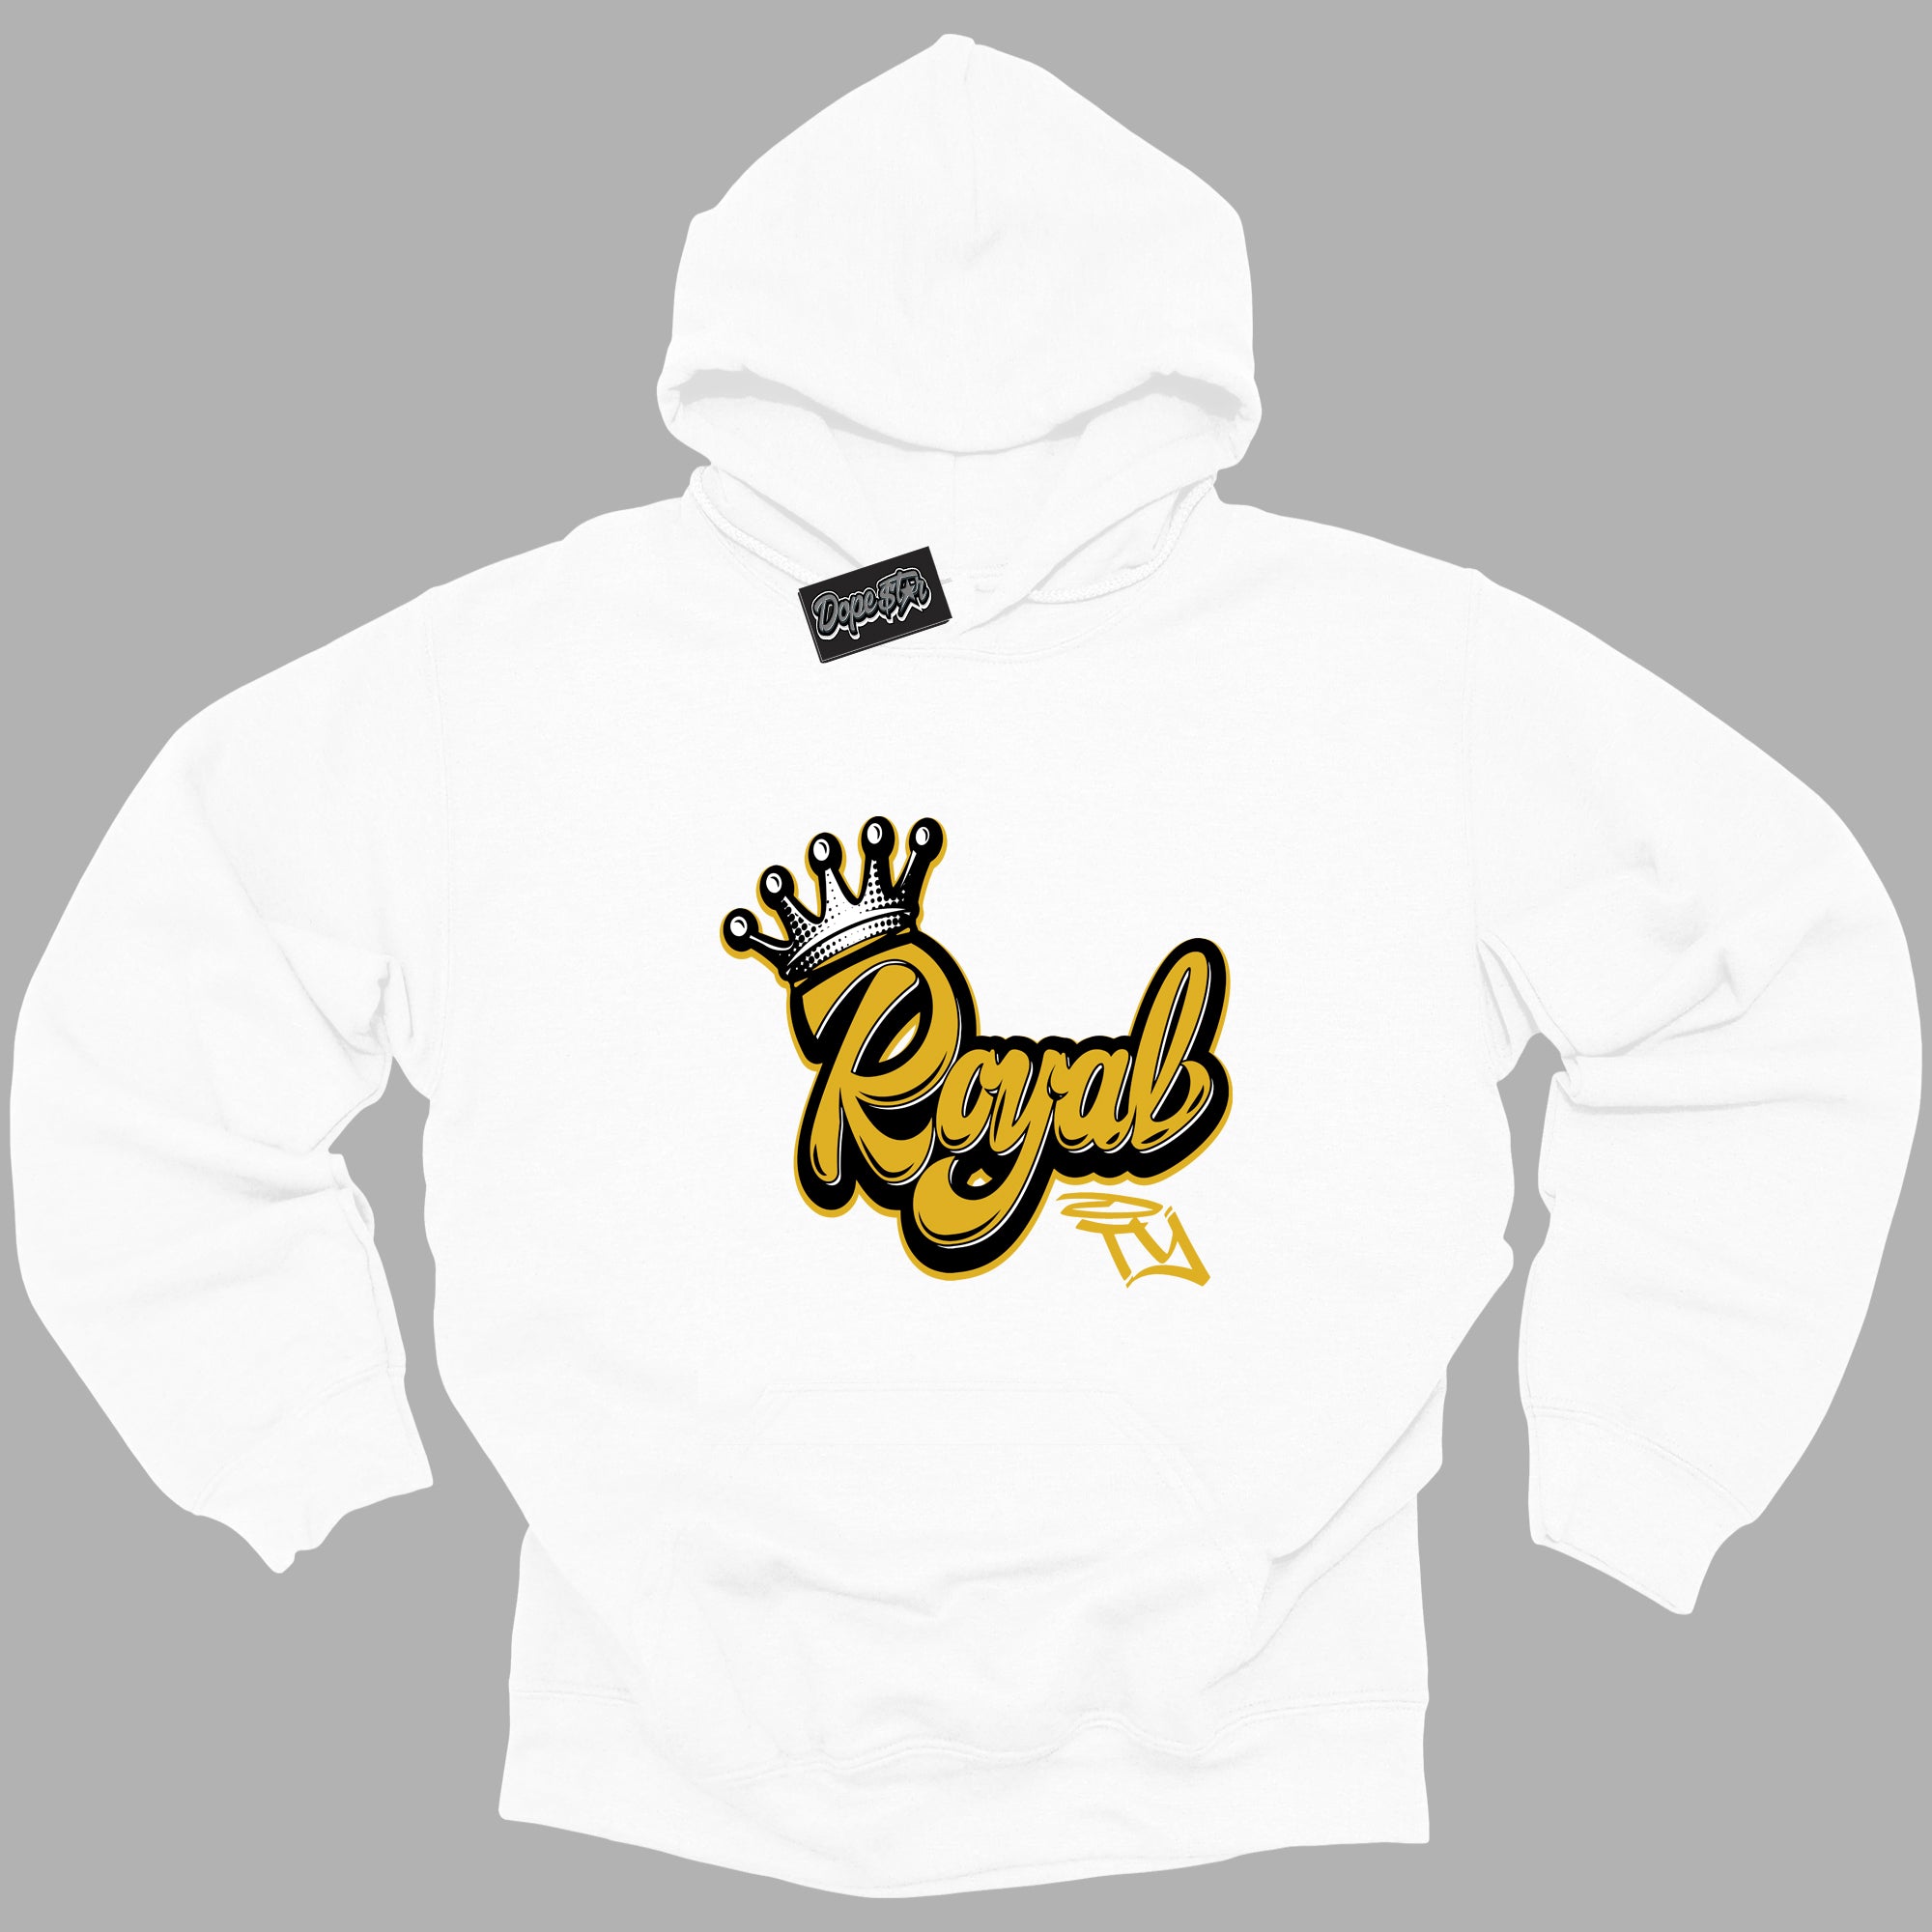 Cool White Hoodie with “ Royalty ”  design that Perfectly Matches Yellow Ochre 6s Sneakers.